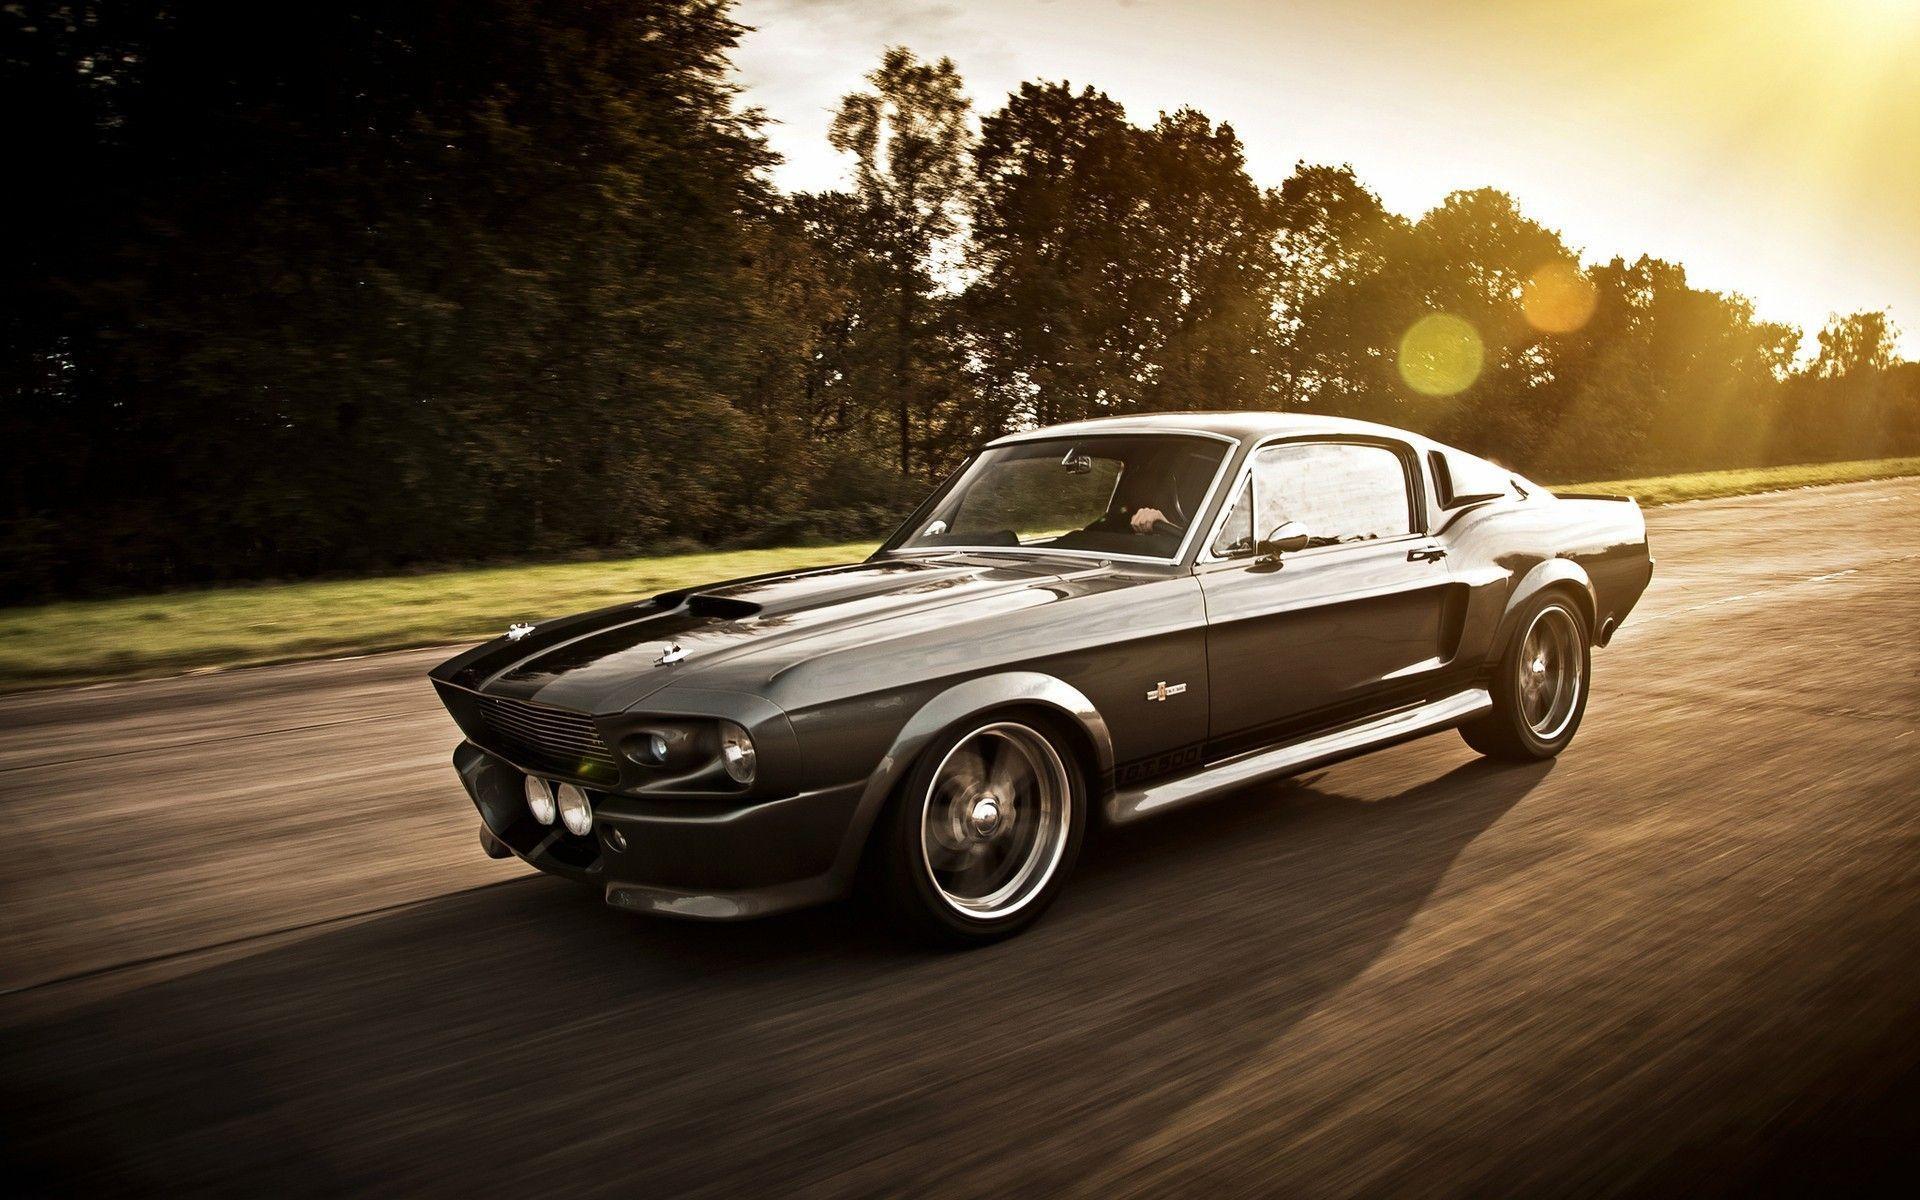 Ford Mustang Wallpapers  HD Wallpapers  ID 27402